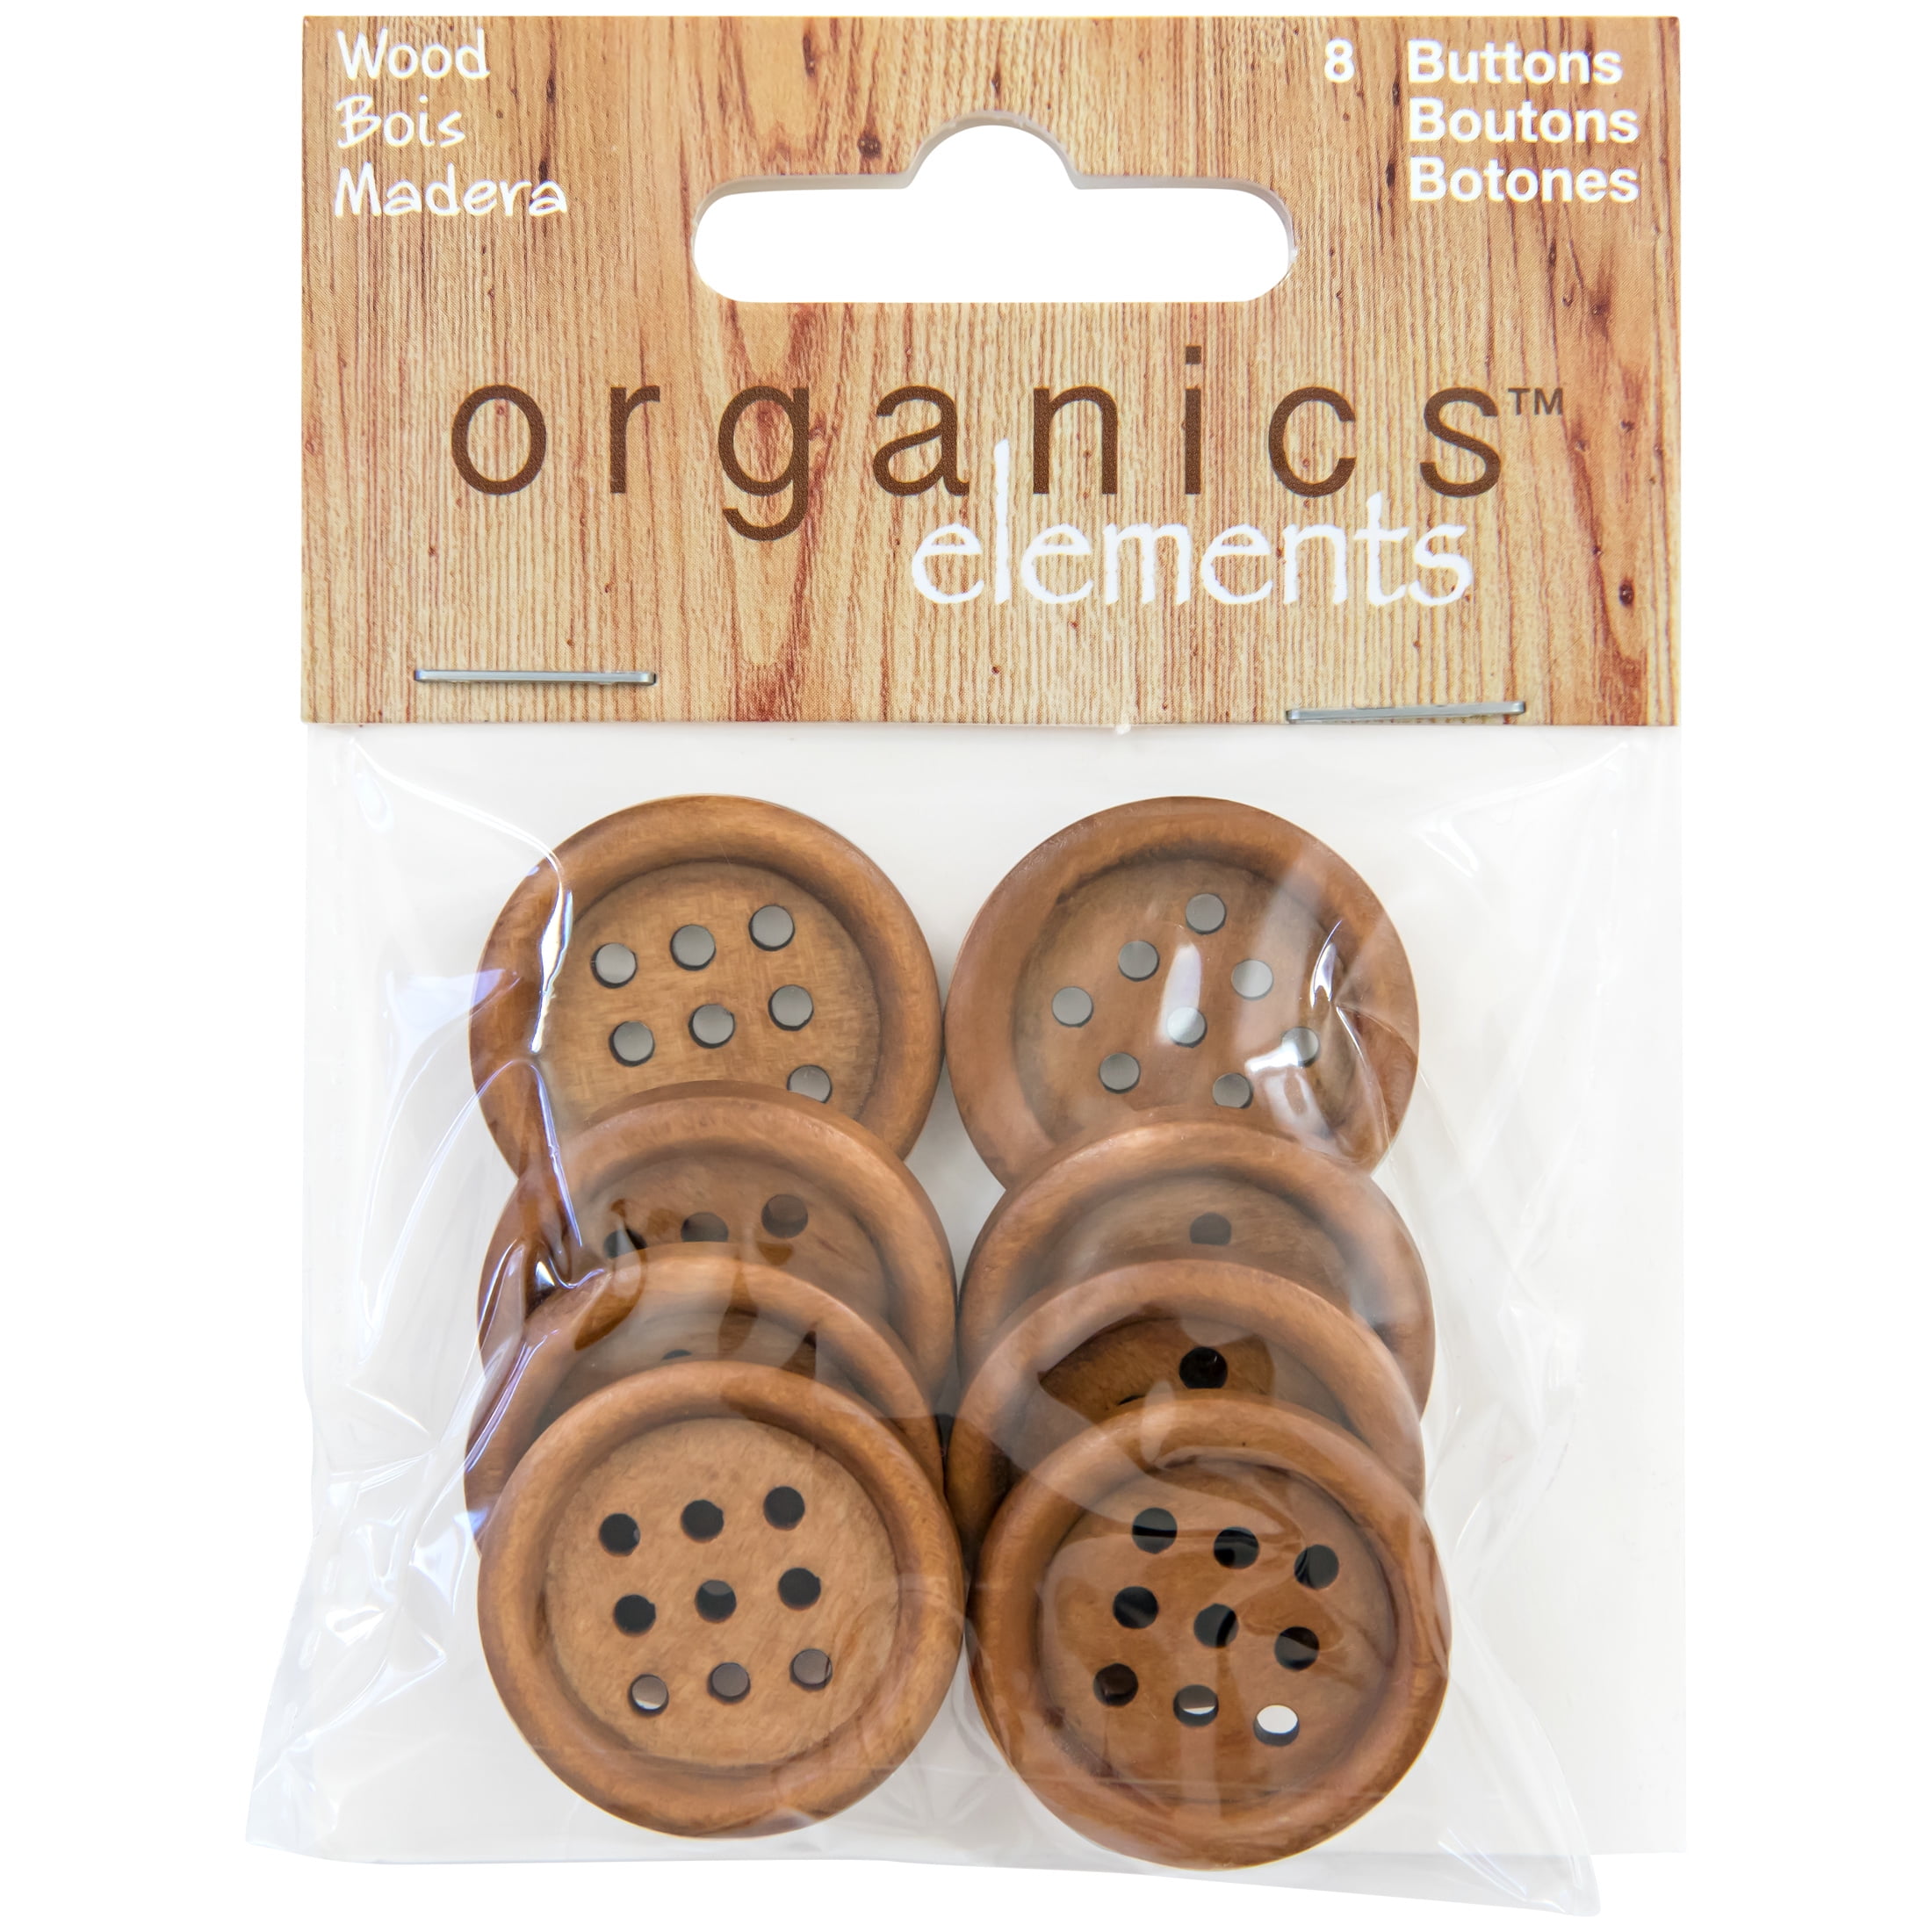 Organic Elements Brown 1" Sew Thru 2-Hole Wood Buttons, 8 Pieces